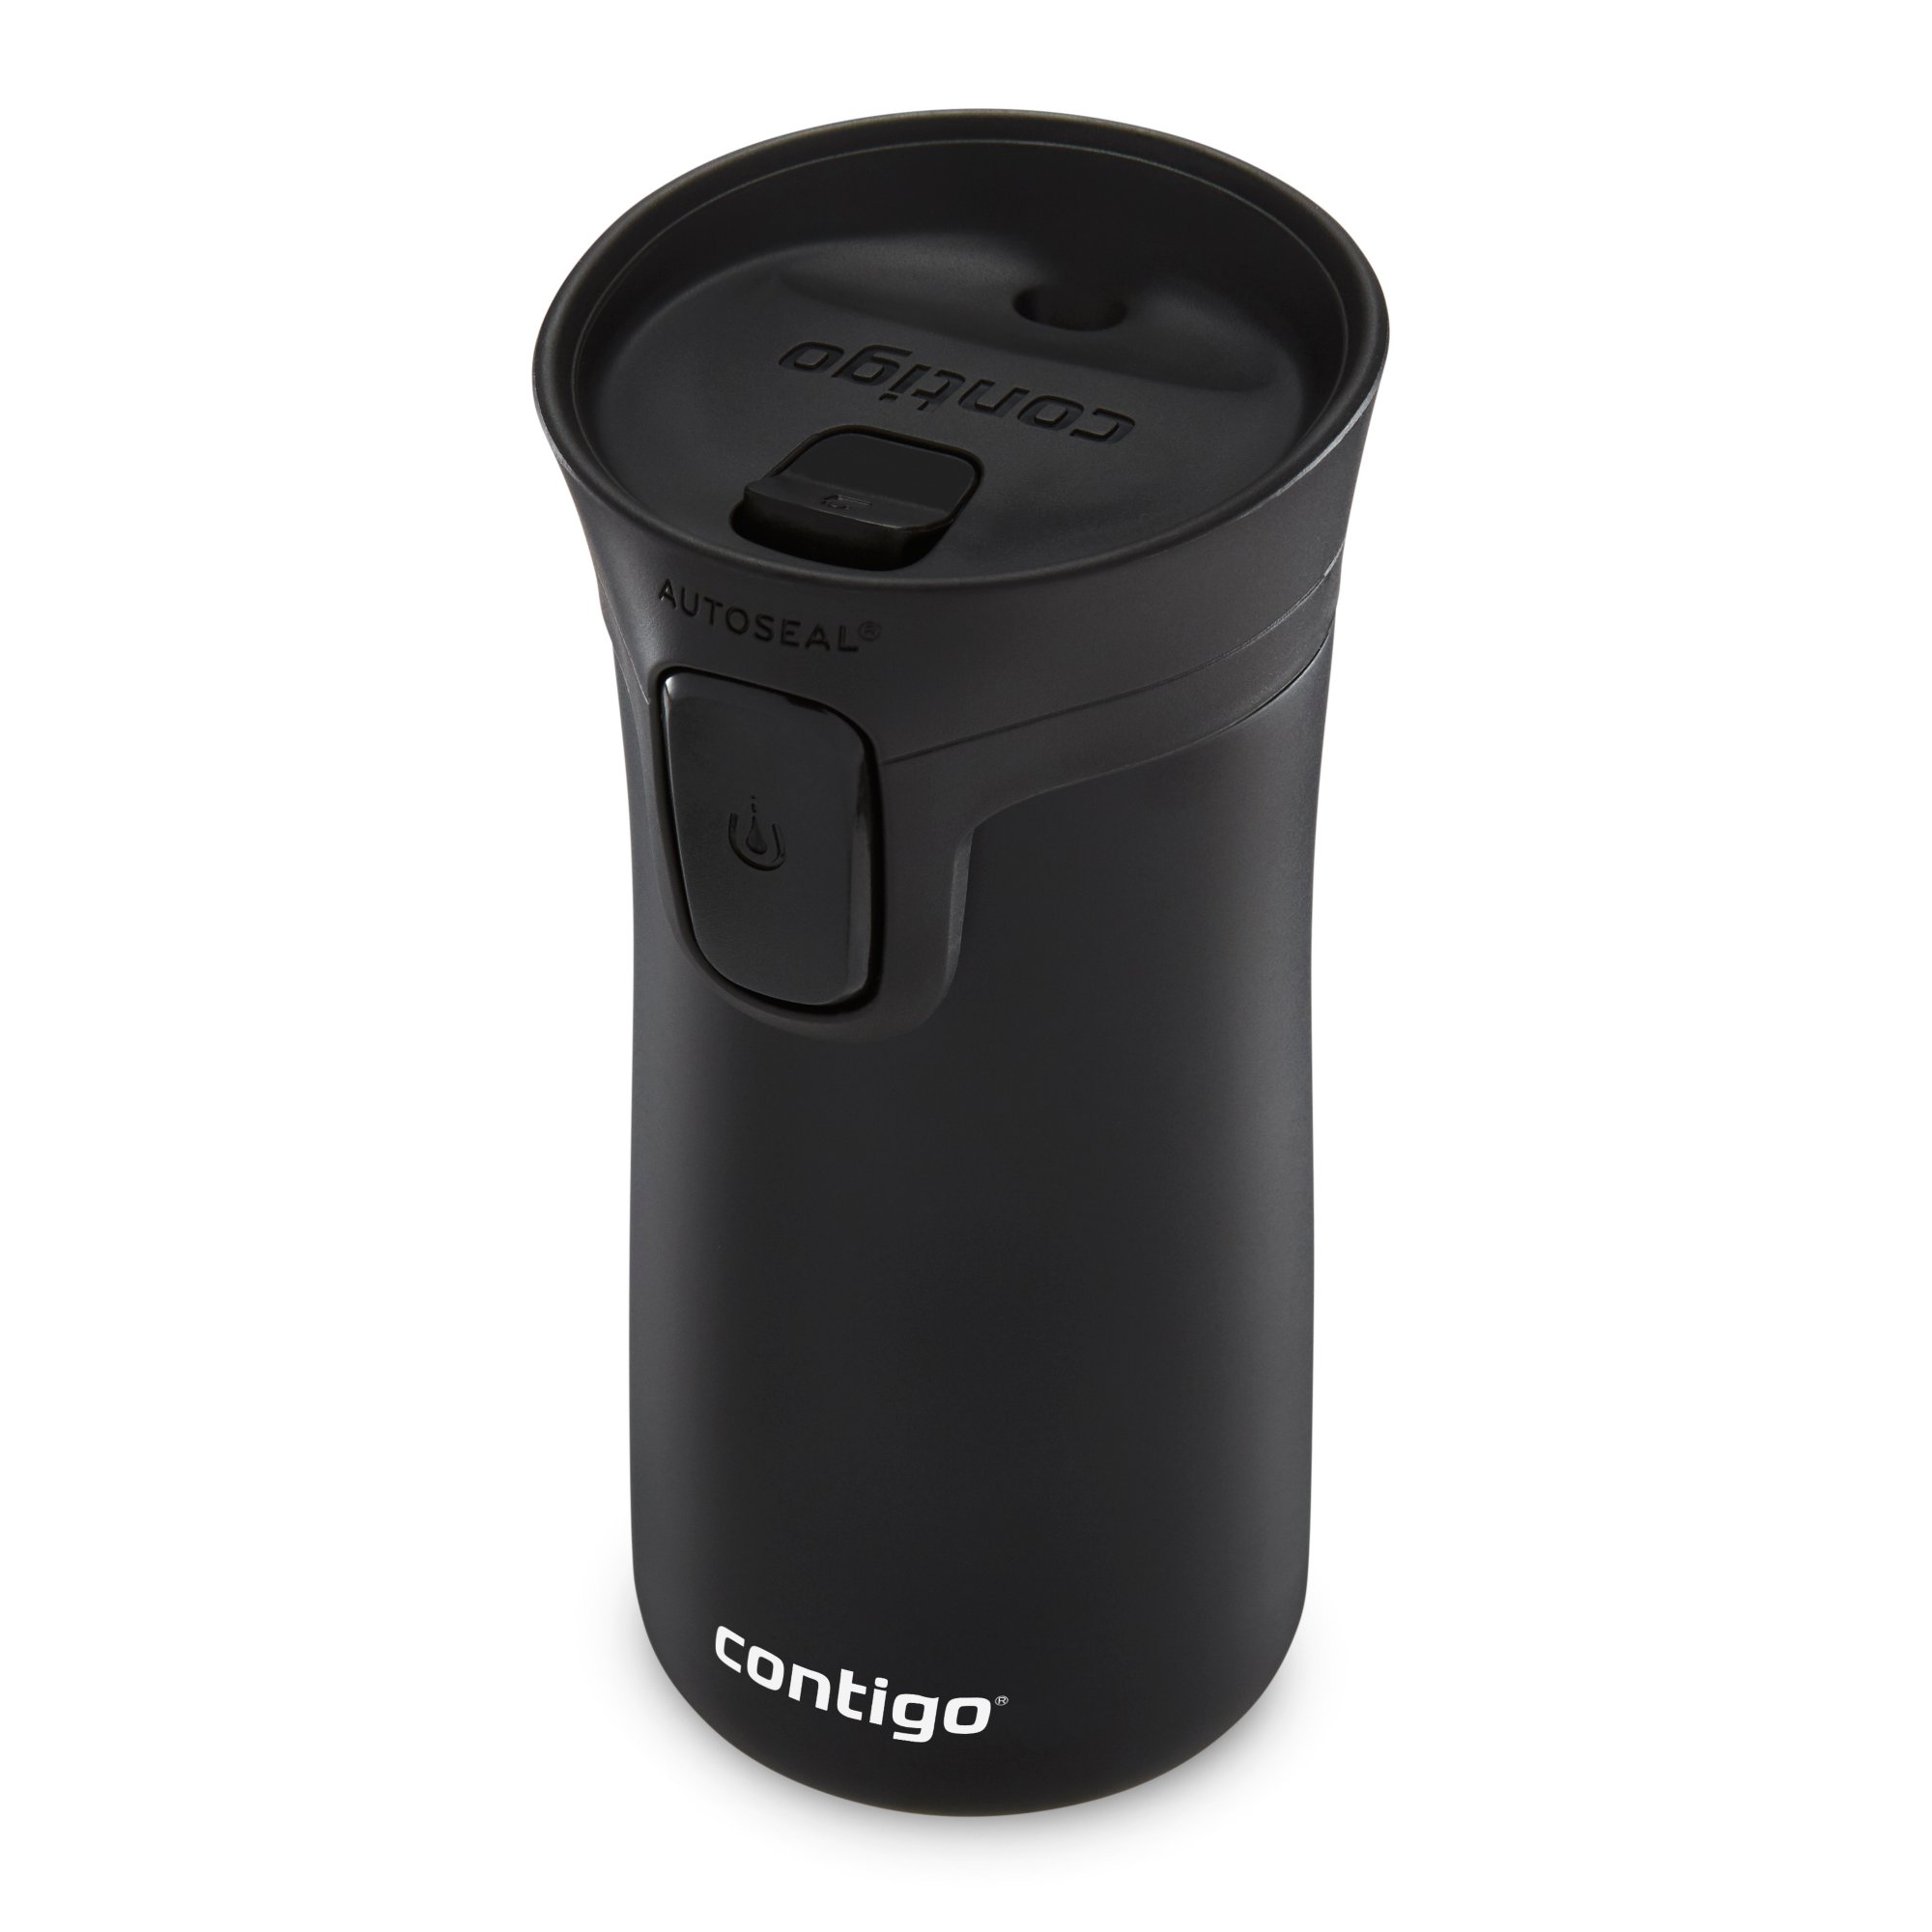 Contigo Pinnacle Vacuum-Insulated Stainless Steel Travel Mug with  Spill-Proof Lid, Reusable Coffee Cup or Water Bottle with Leak-Proof Lid,  Keeps